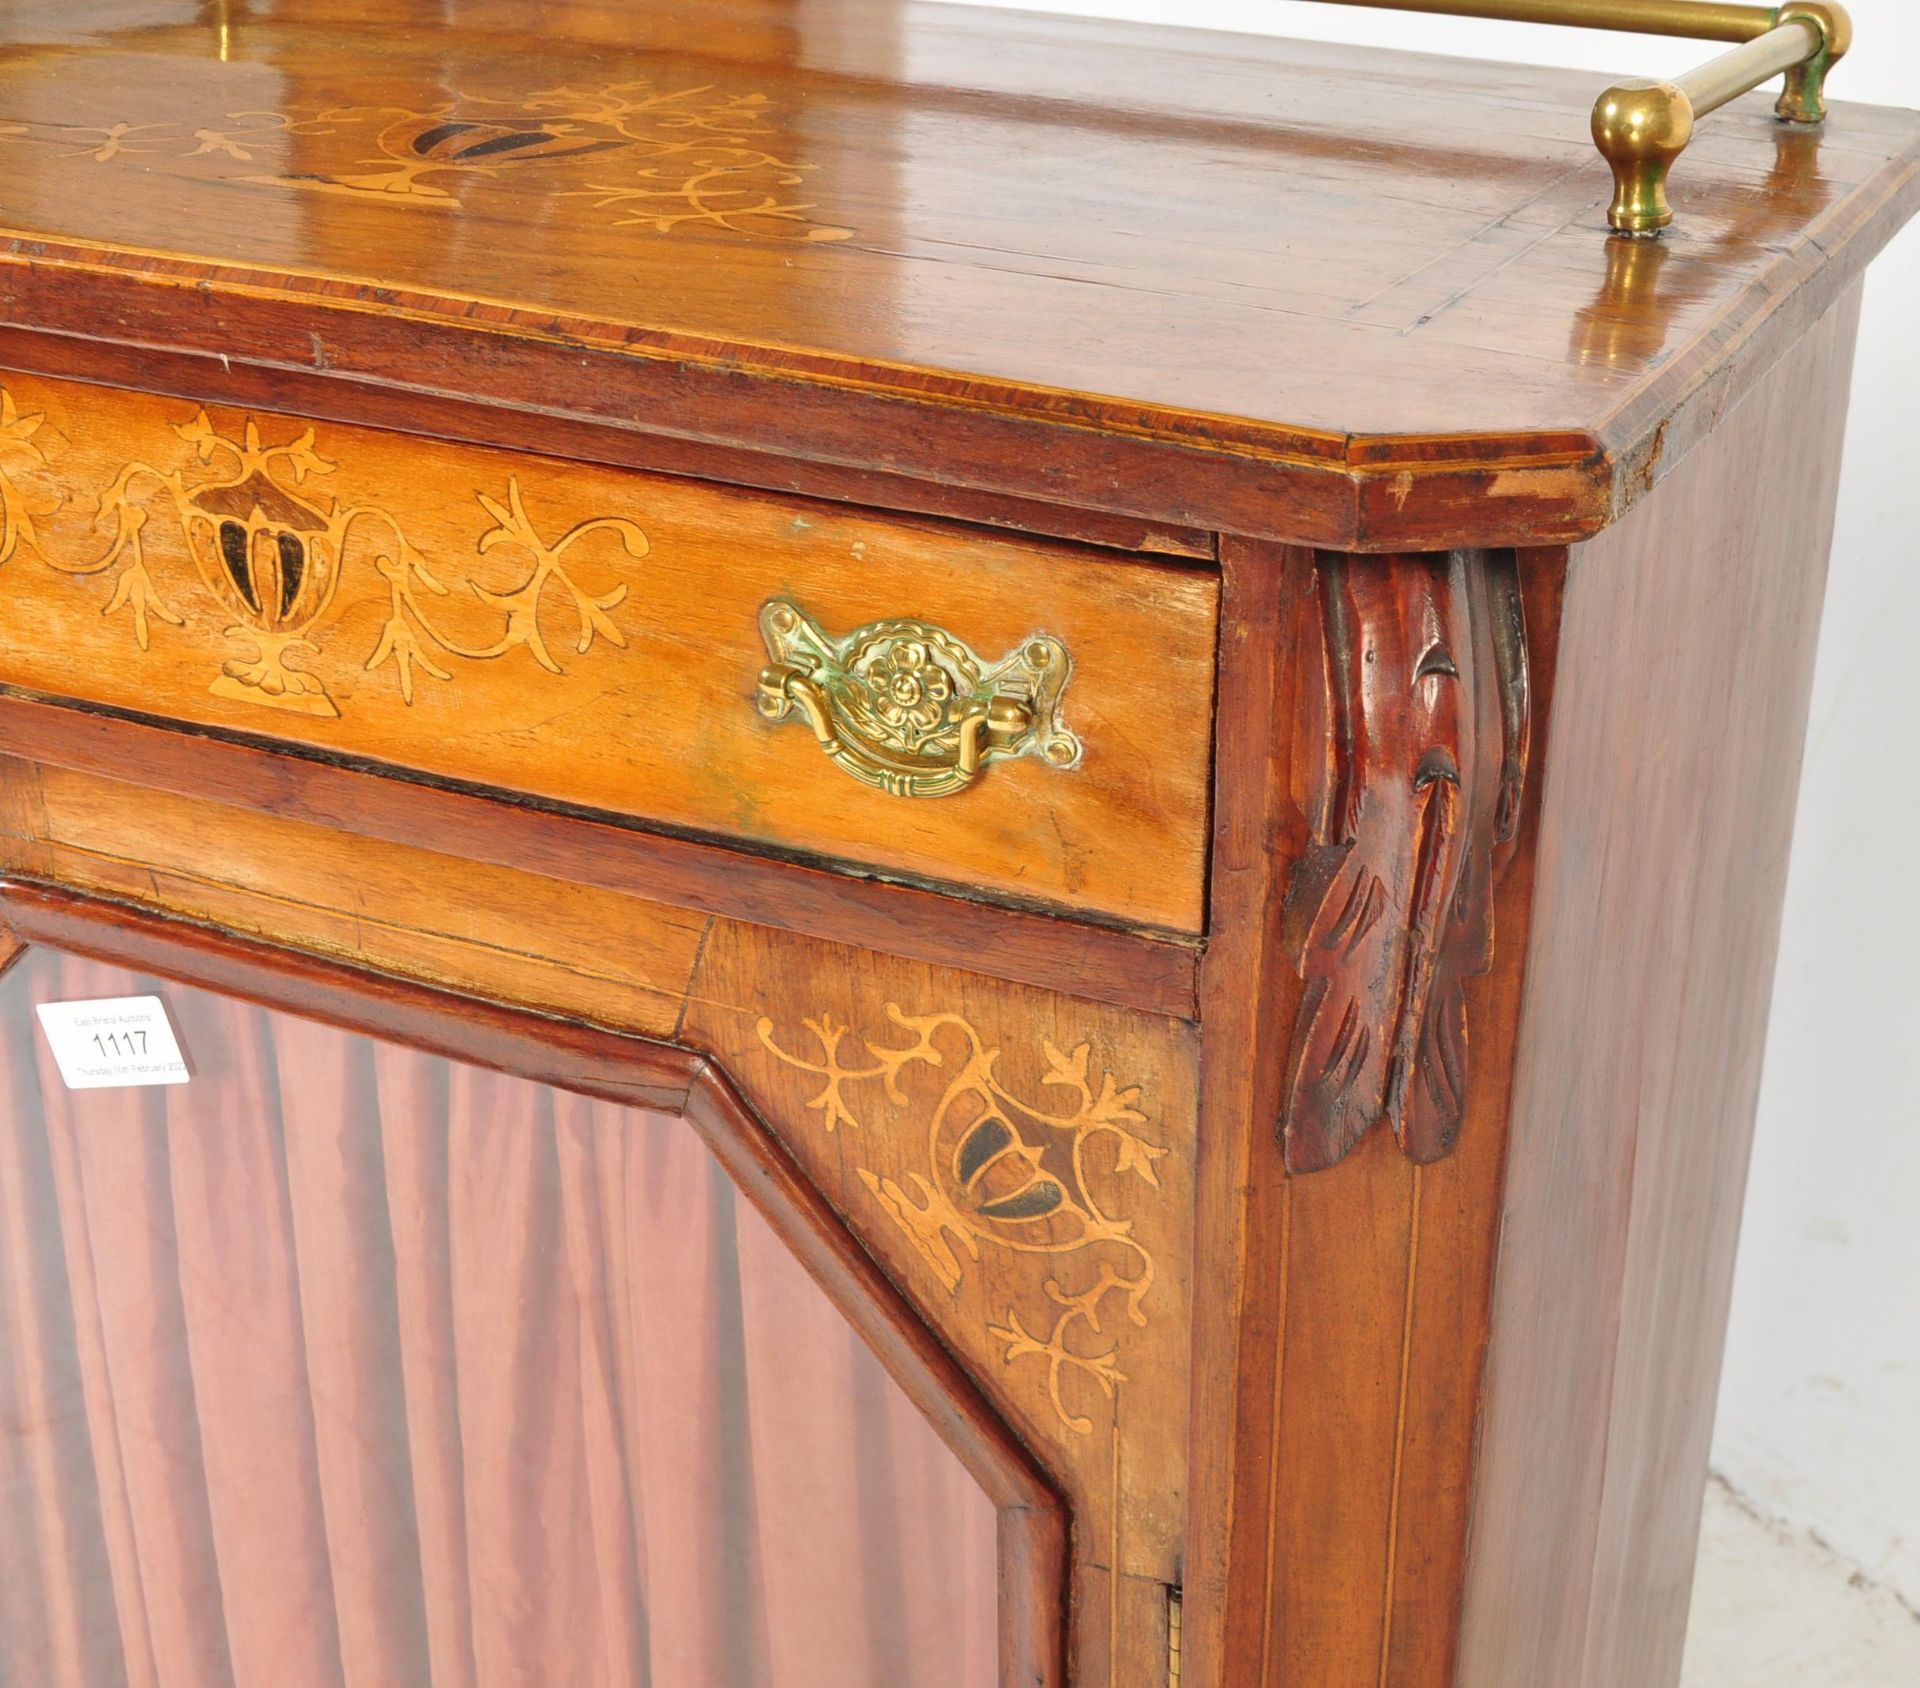 LATE 19TH CENTURY MARQUETRY INLAID PEDESTAL MUSIC CABINET - Image 9 of 10